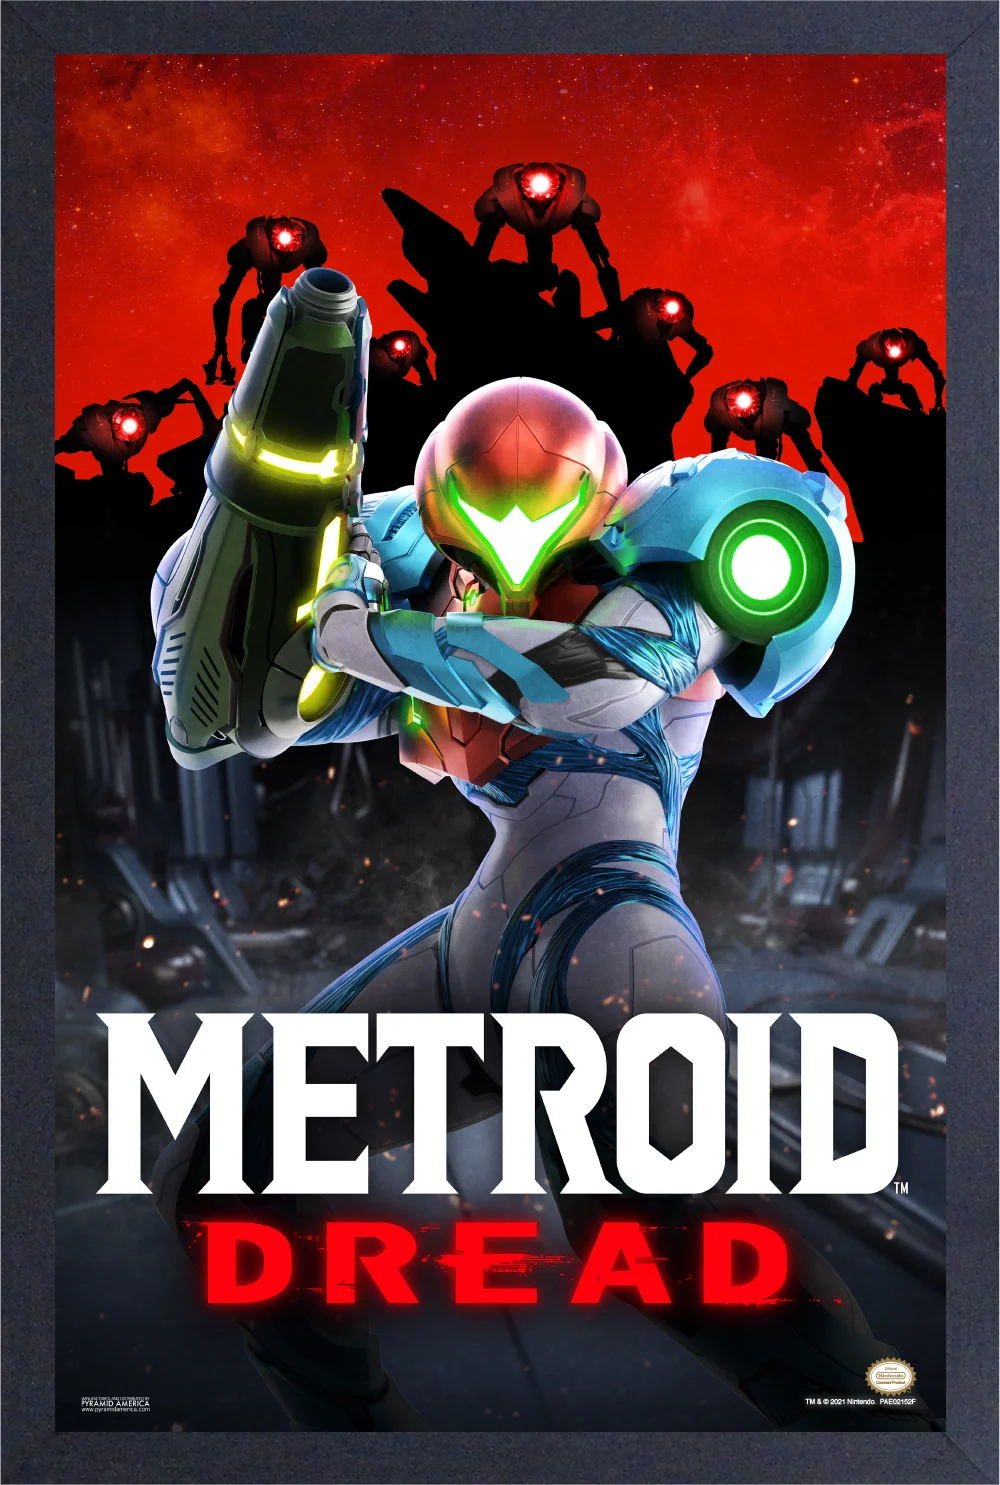 Metroid - Metroid Dread (11"x17" Gel-Coat) (Order in multiples of 6, mix and match styles)